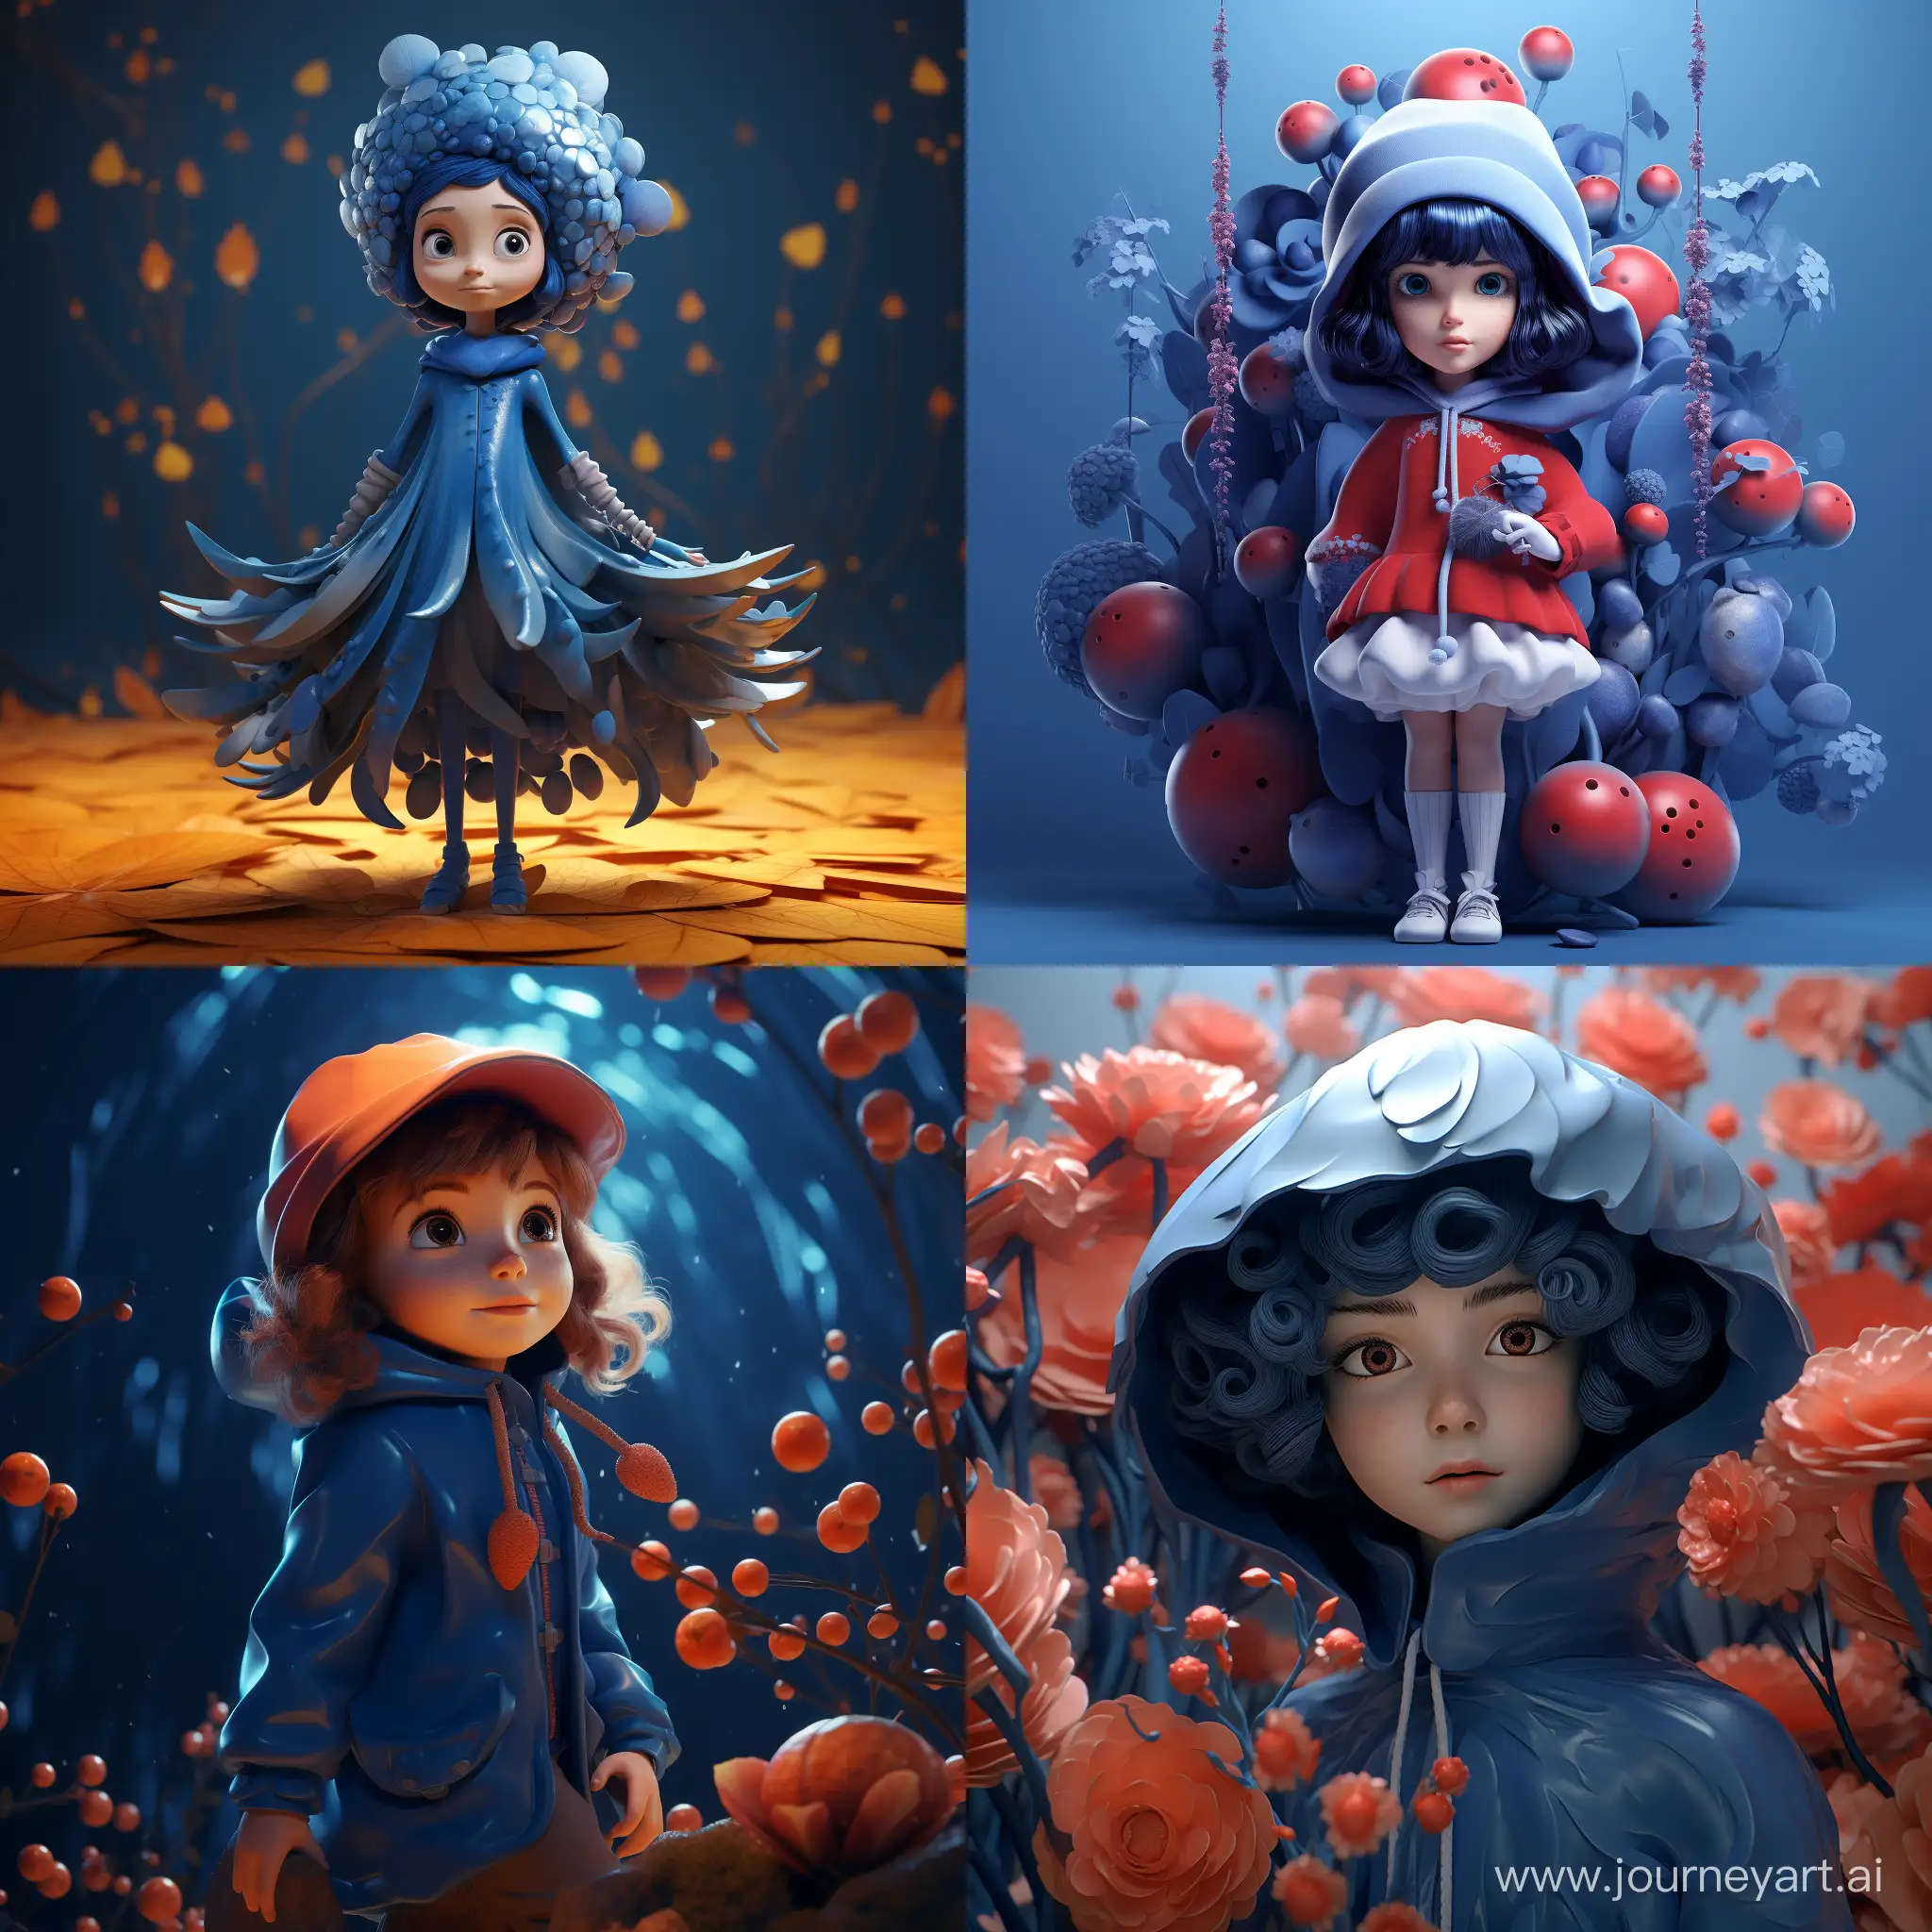 Enchanting-3D-Animation-Girl-in-Blueberry-Costume